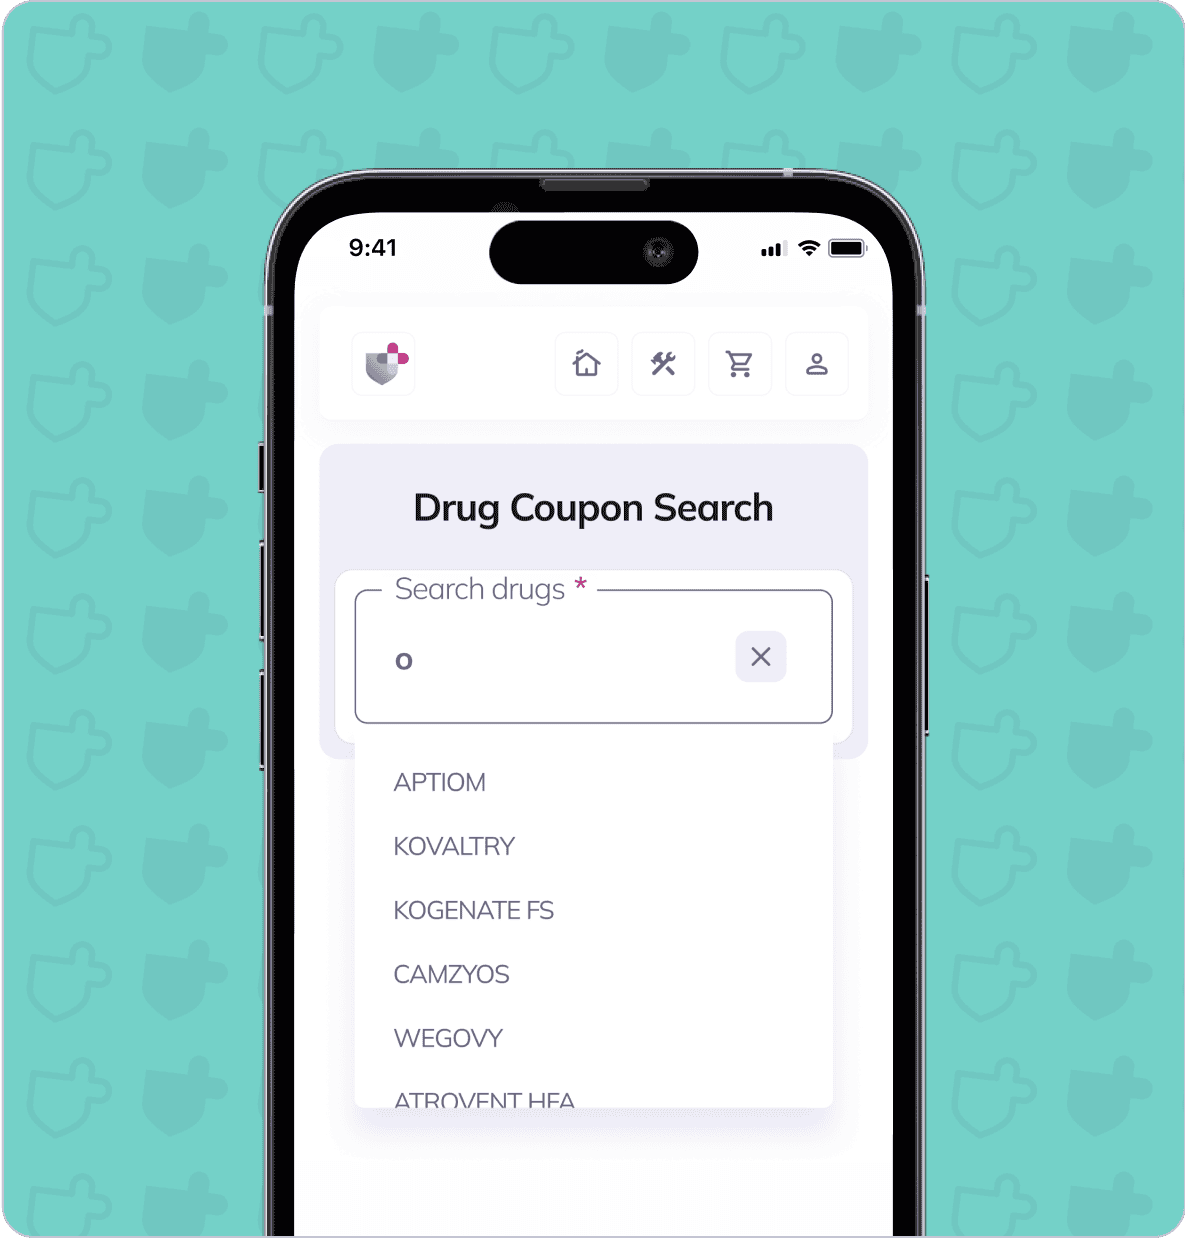 Smartphone screen displaying a drug coupon search interface with a dropdown list of drug names including "Aptiom" and "Wegovy." The background is patterned with shield icons.